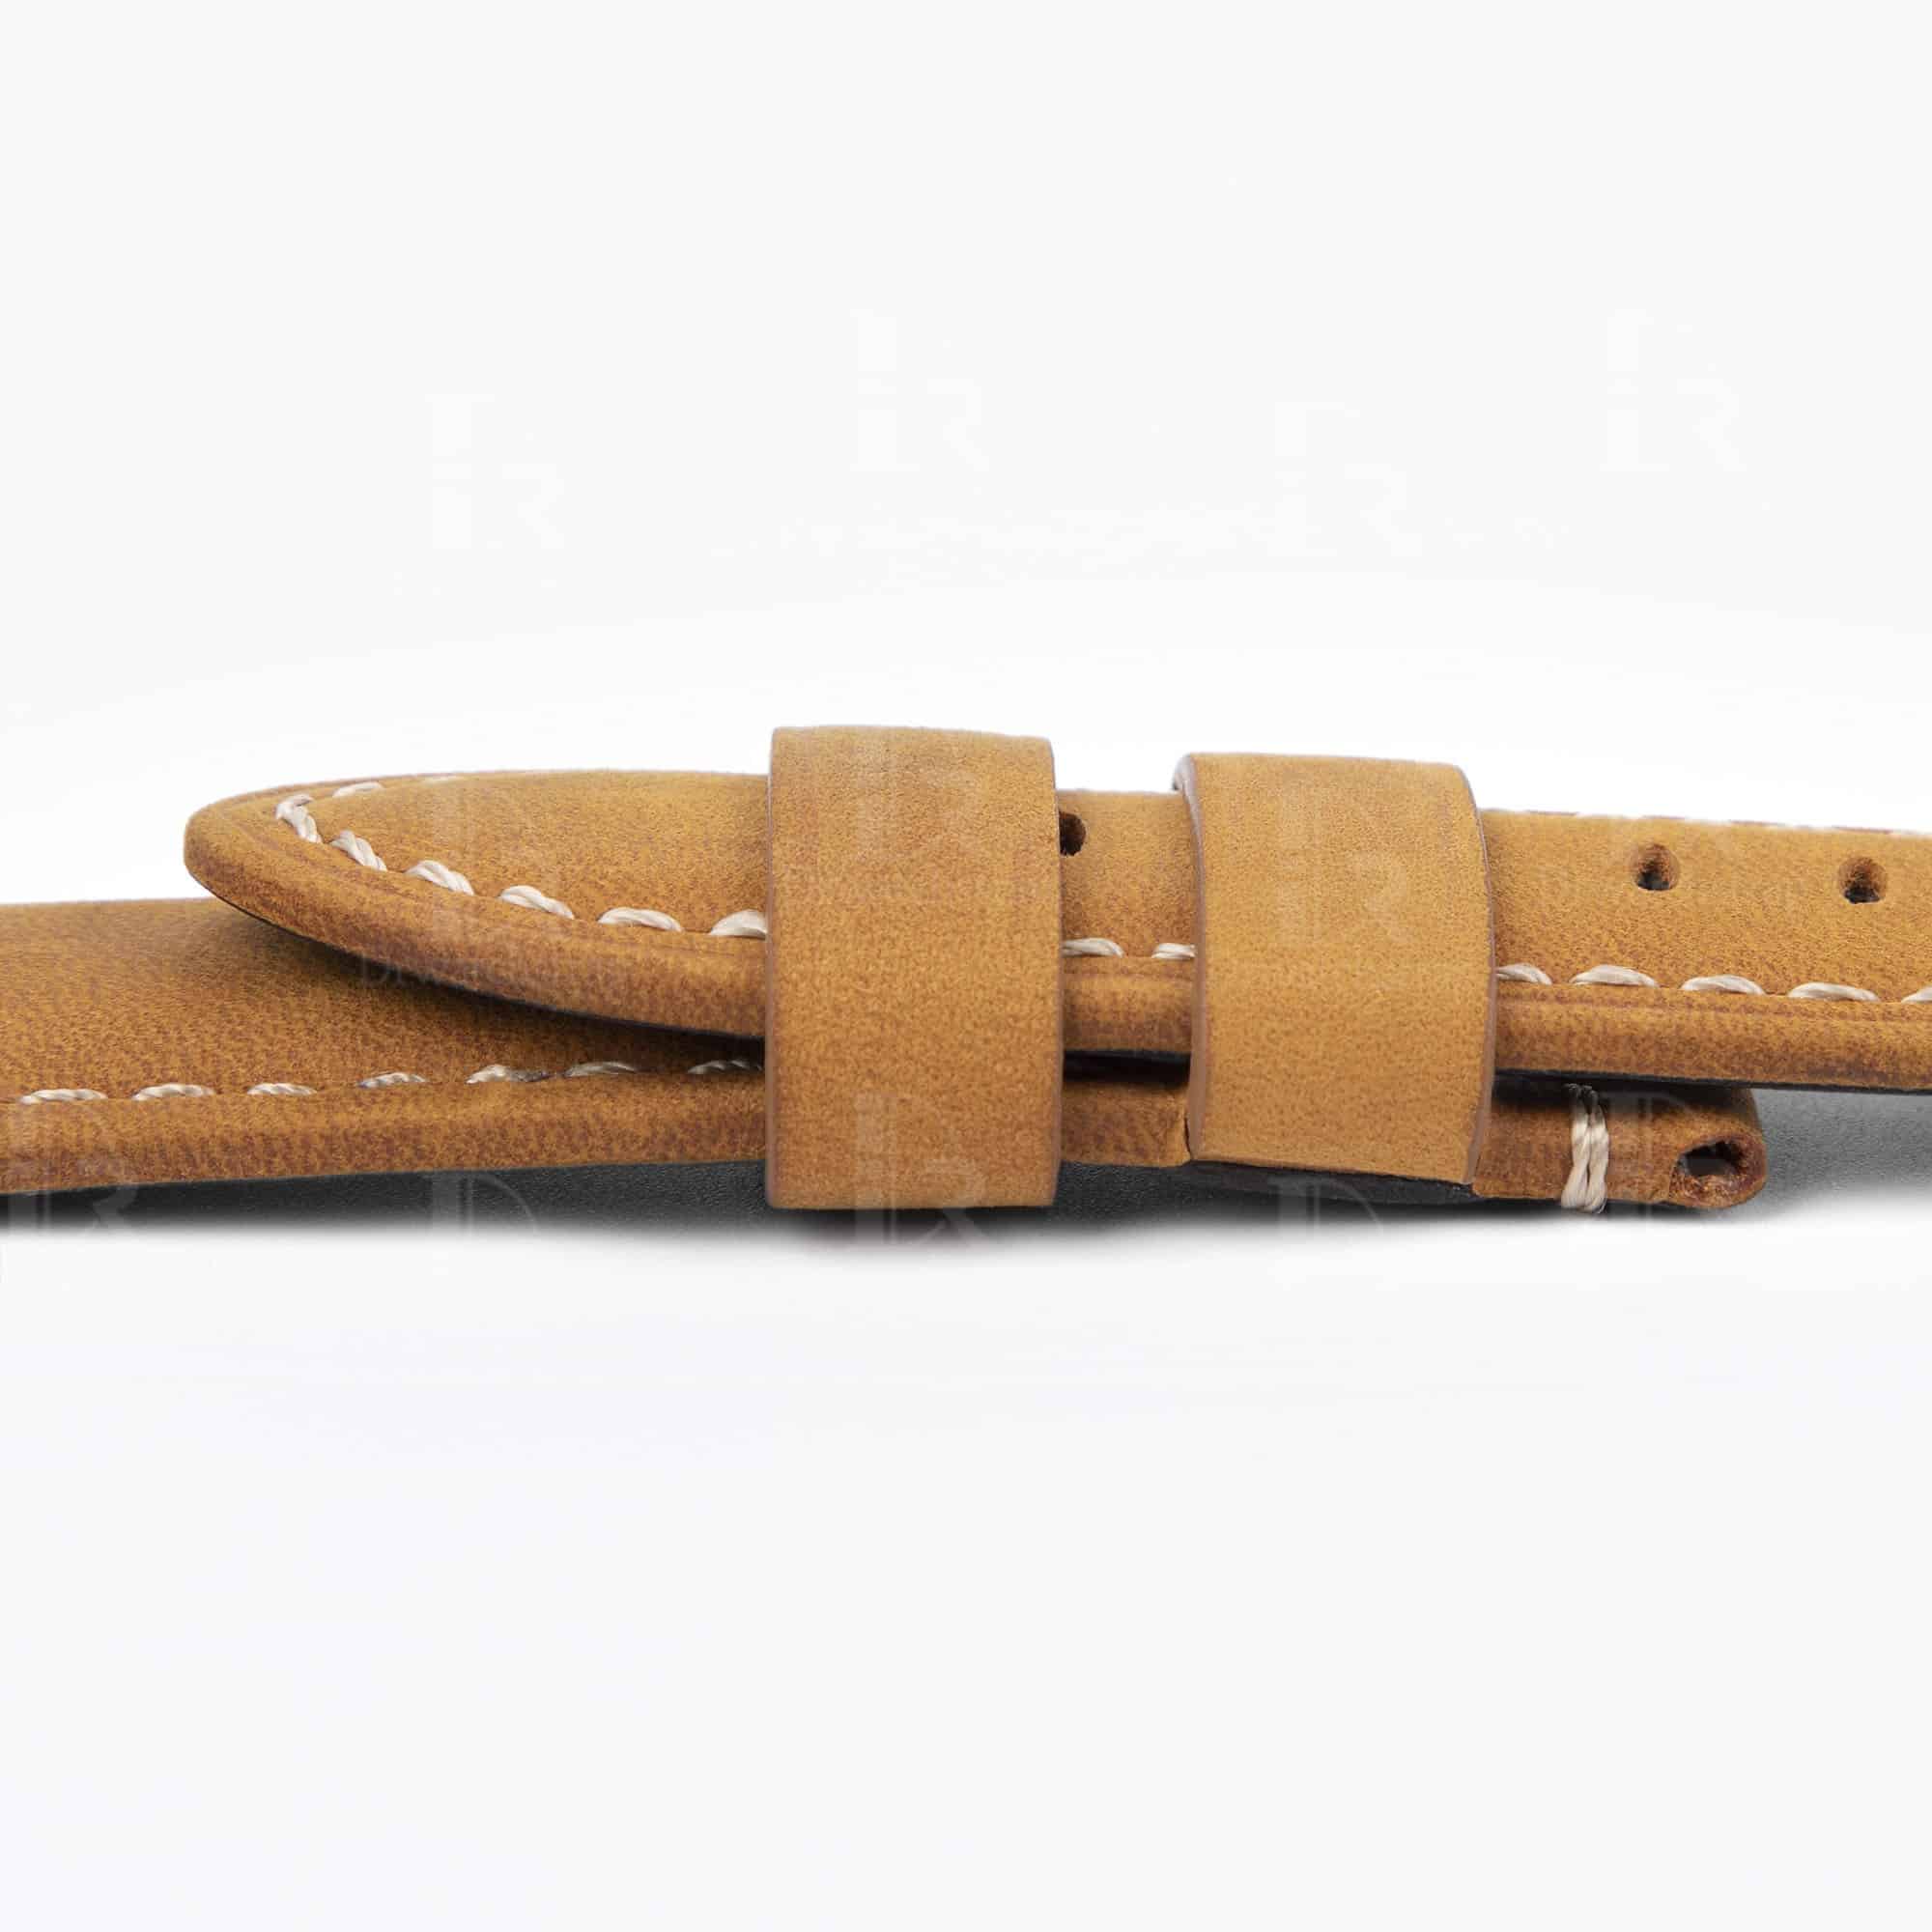 Premium custom best aftermarket calfskin material brown Panerai 22mm leather strap & watch band replacement OEM handmade for Panerai Luminor Radiomir luxury watches from DR Watchstrap online - Shop the wholesale and retail genuine calf leather watch straps and watch bands at a low price